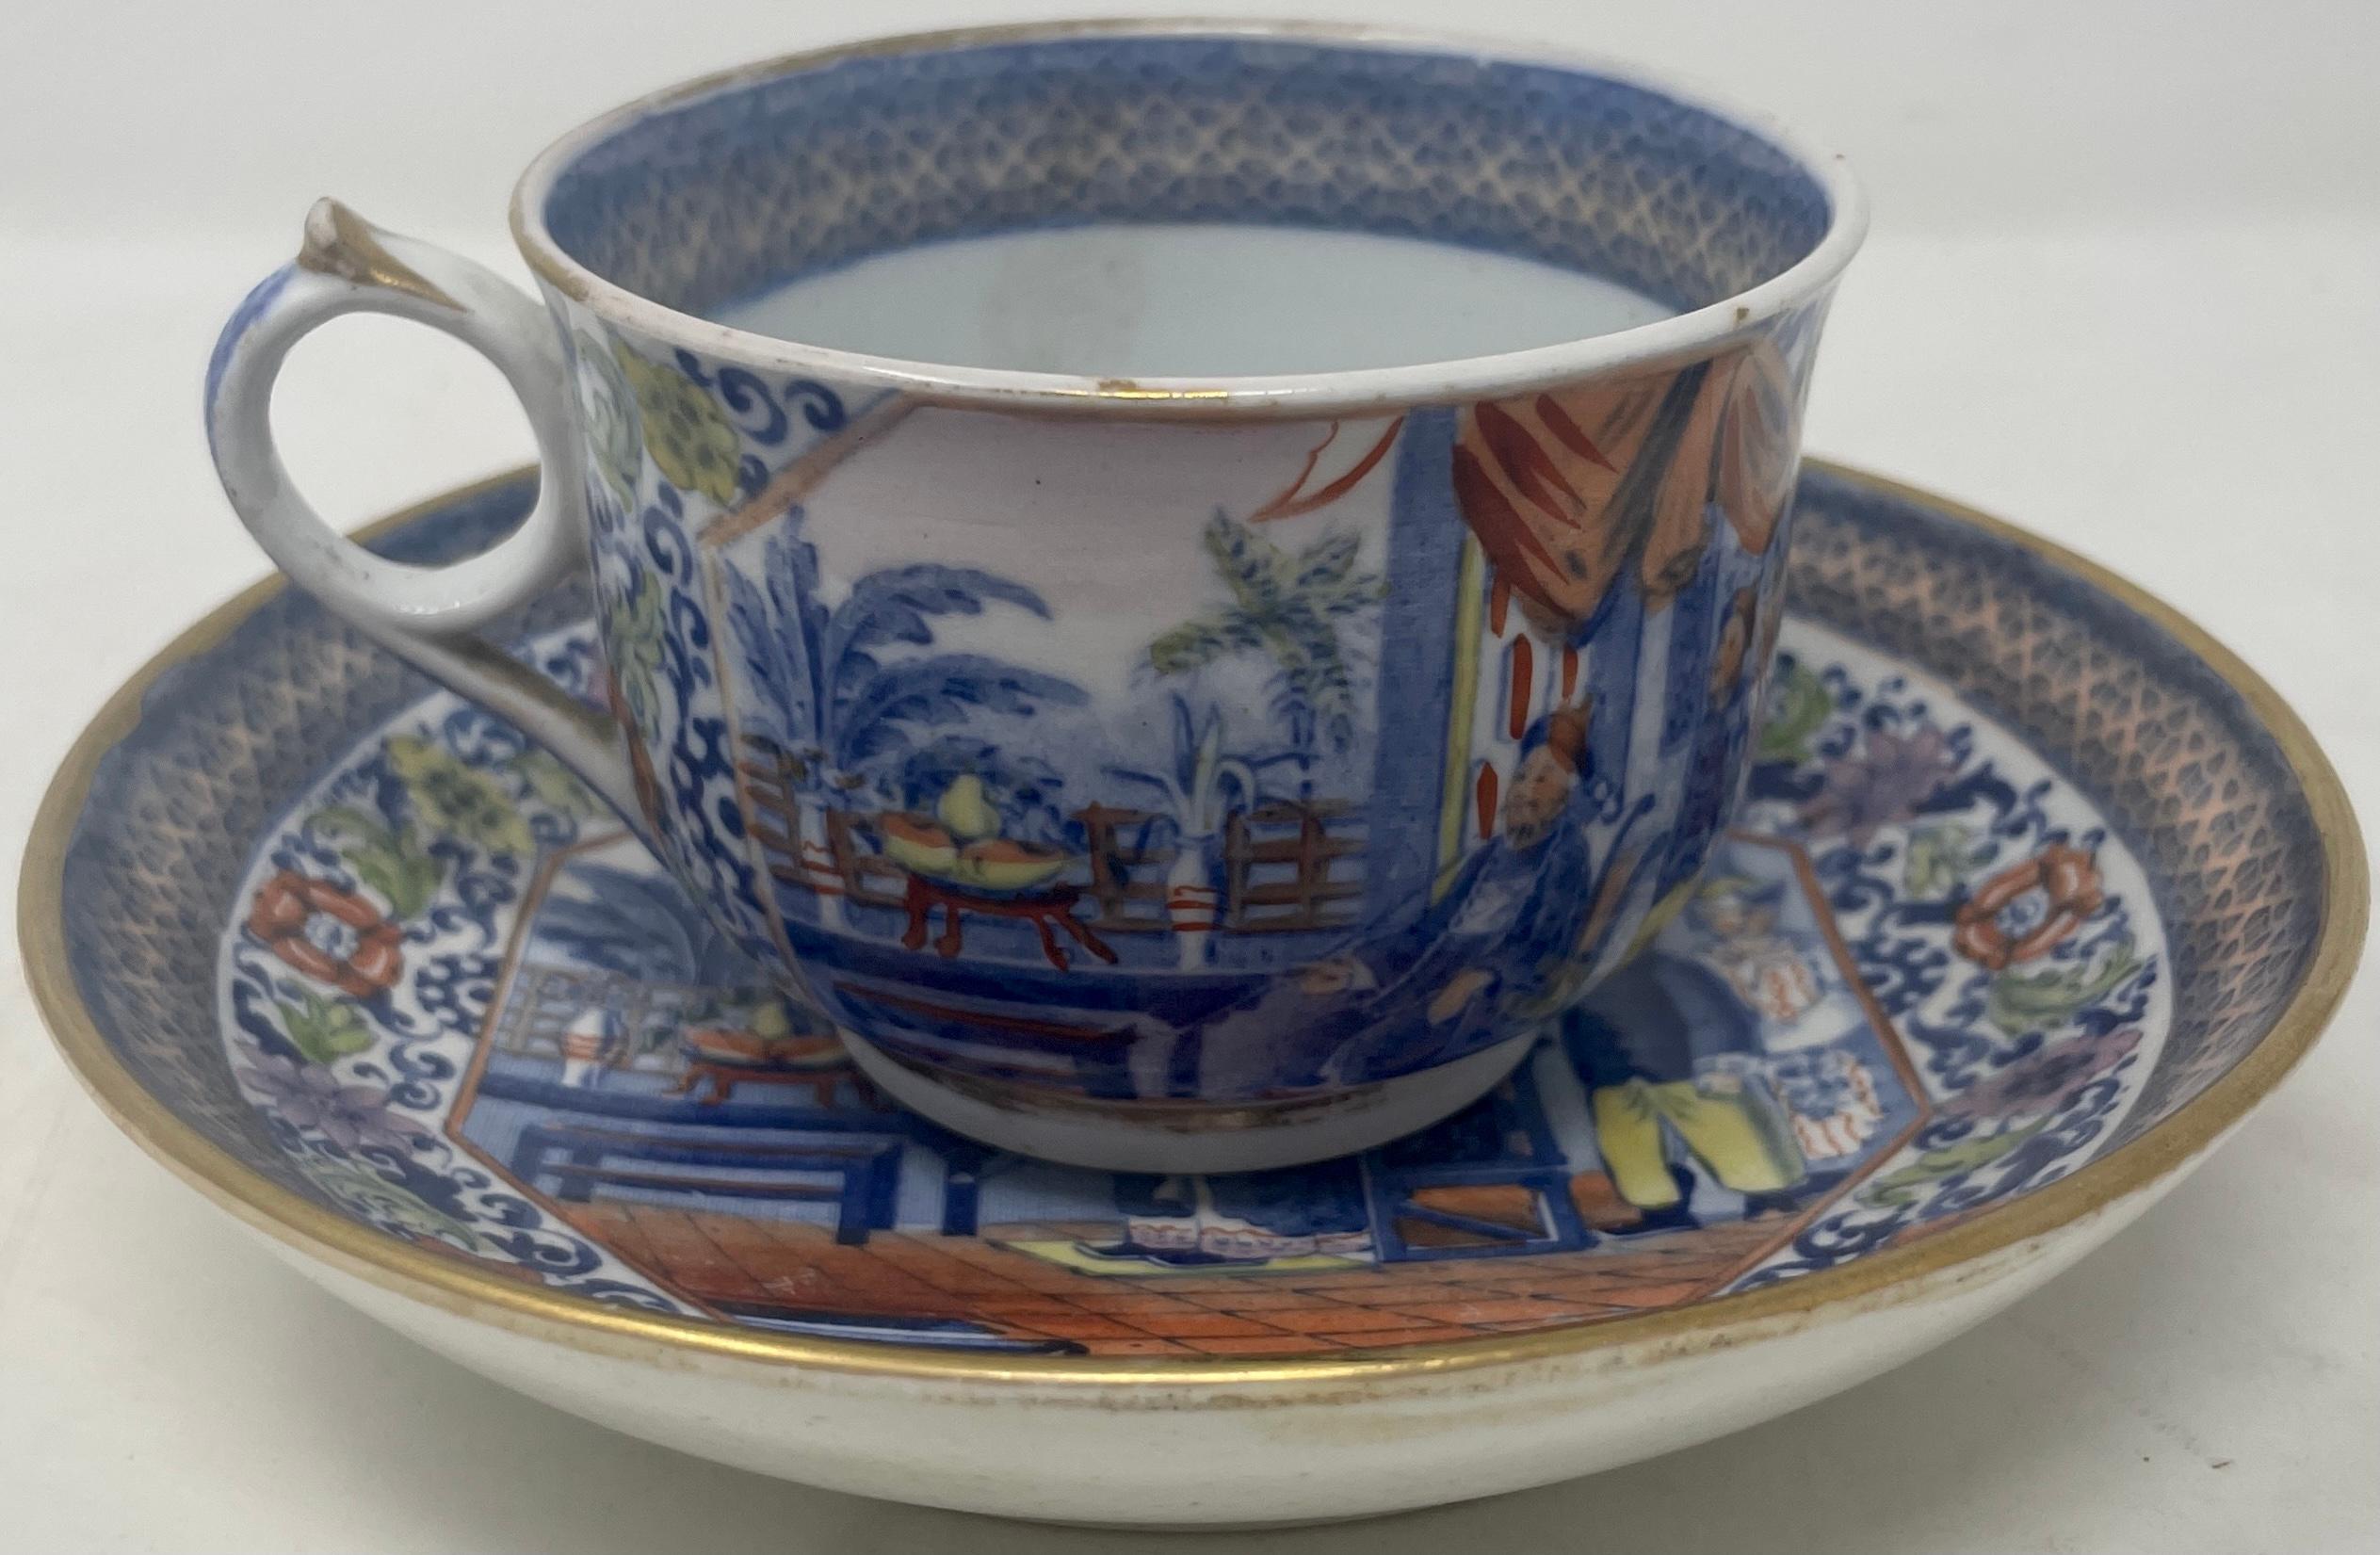 Antique Chinese cup & saucer, circa 1840.